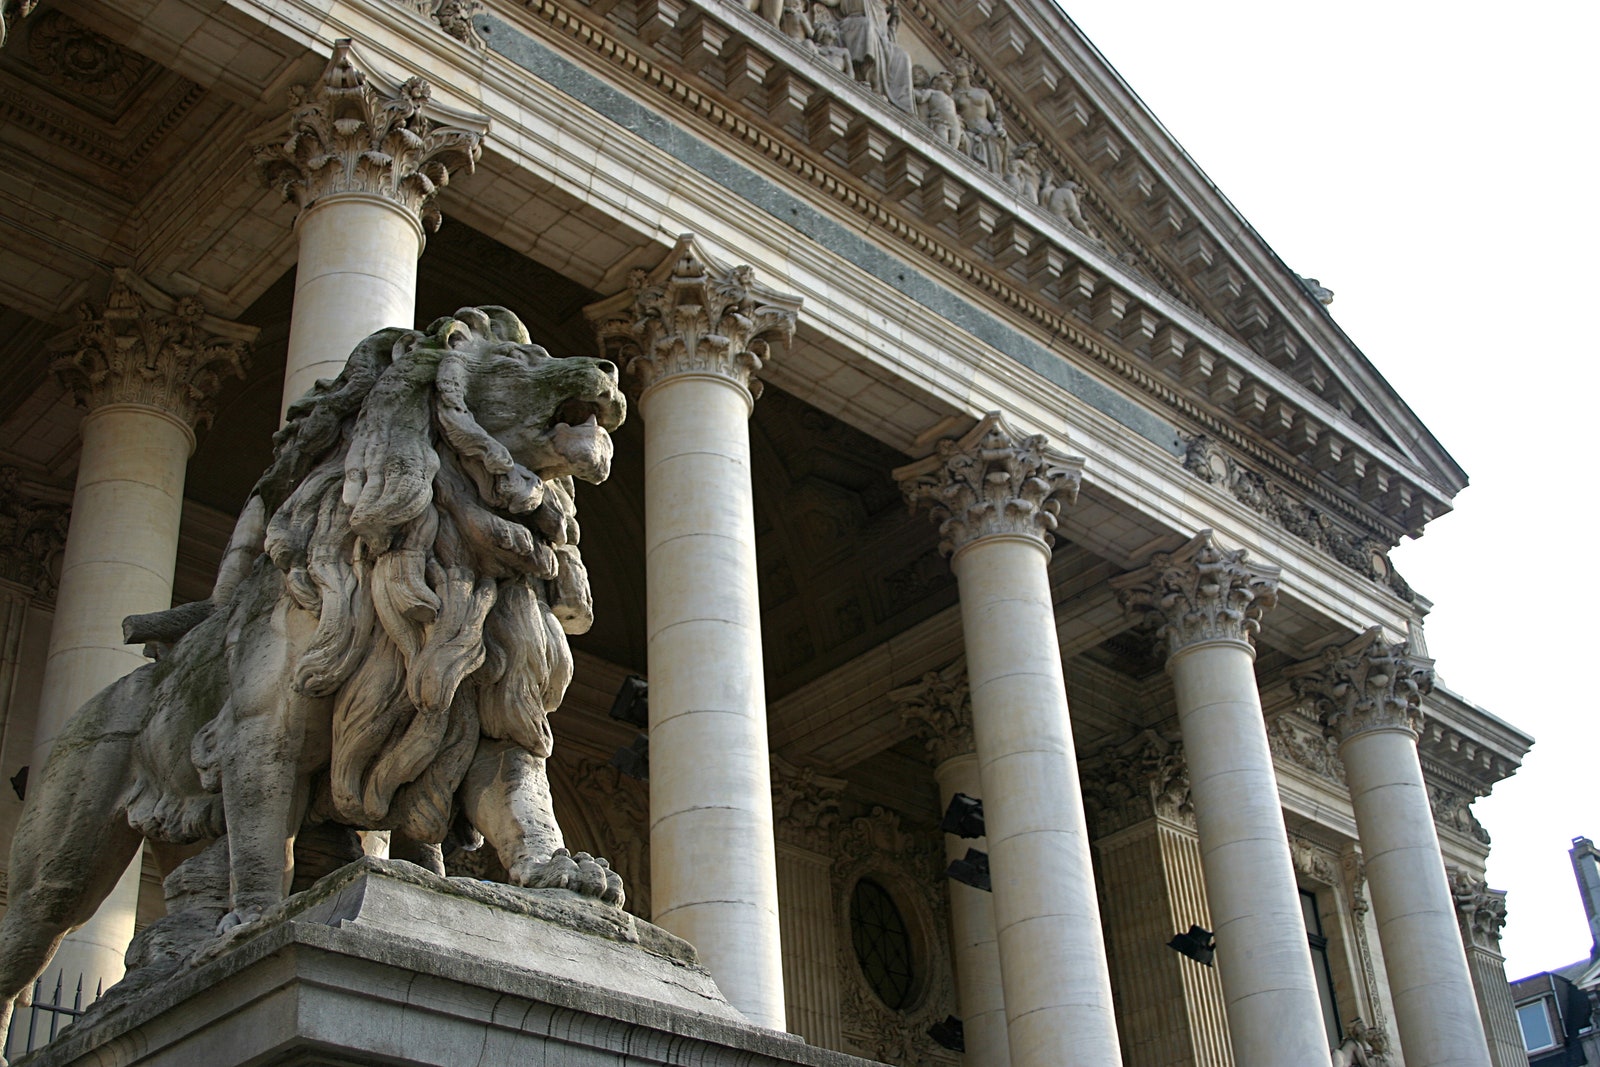 Lion out front of Brussels Stock Exchange